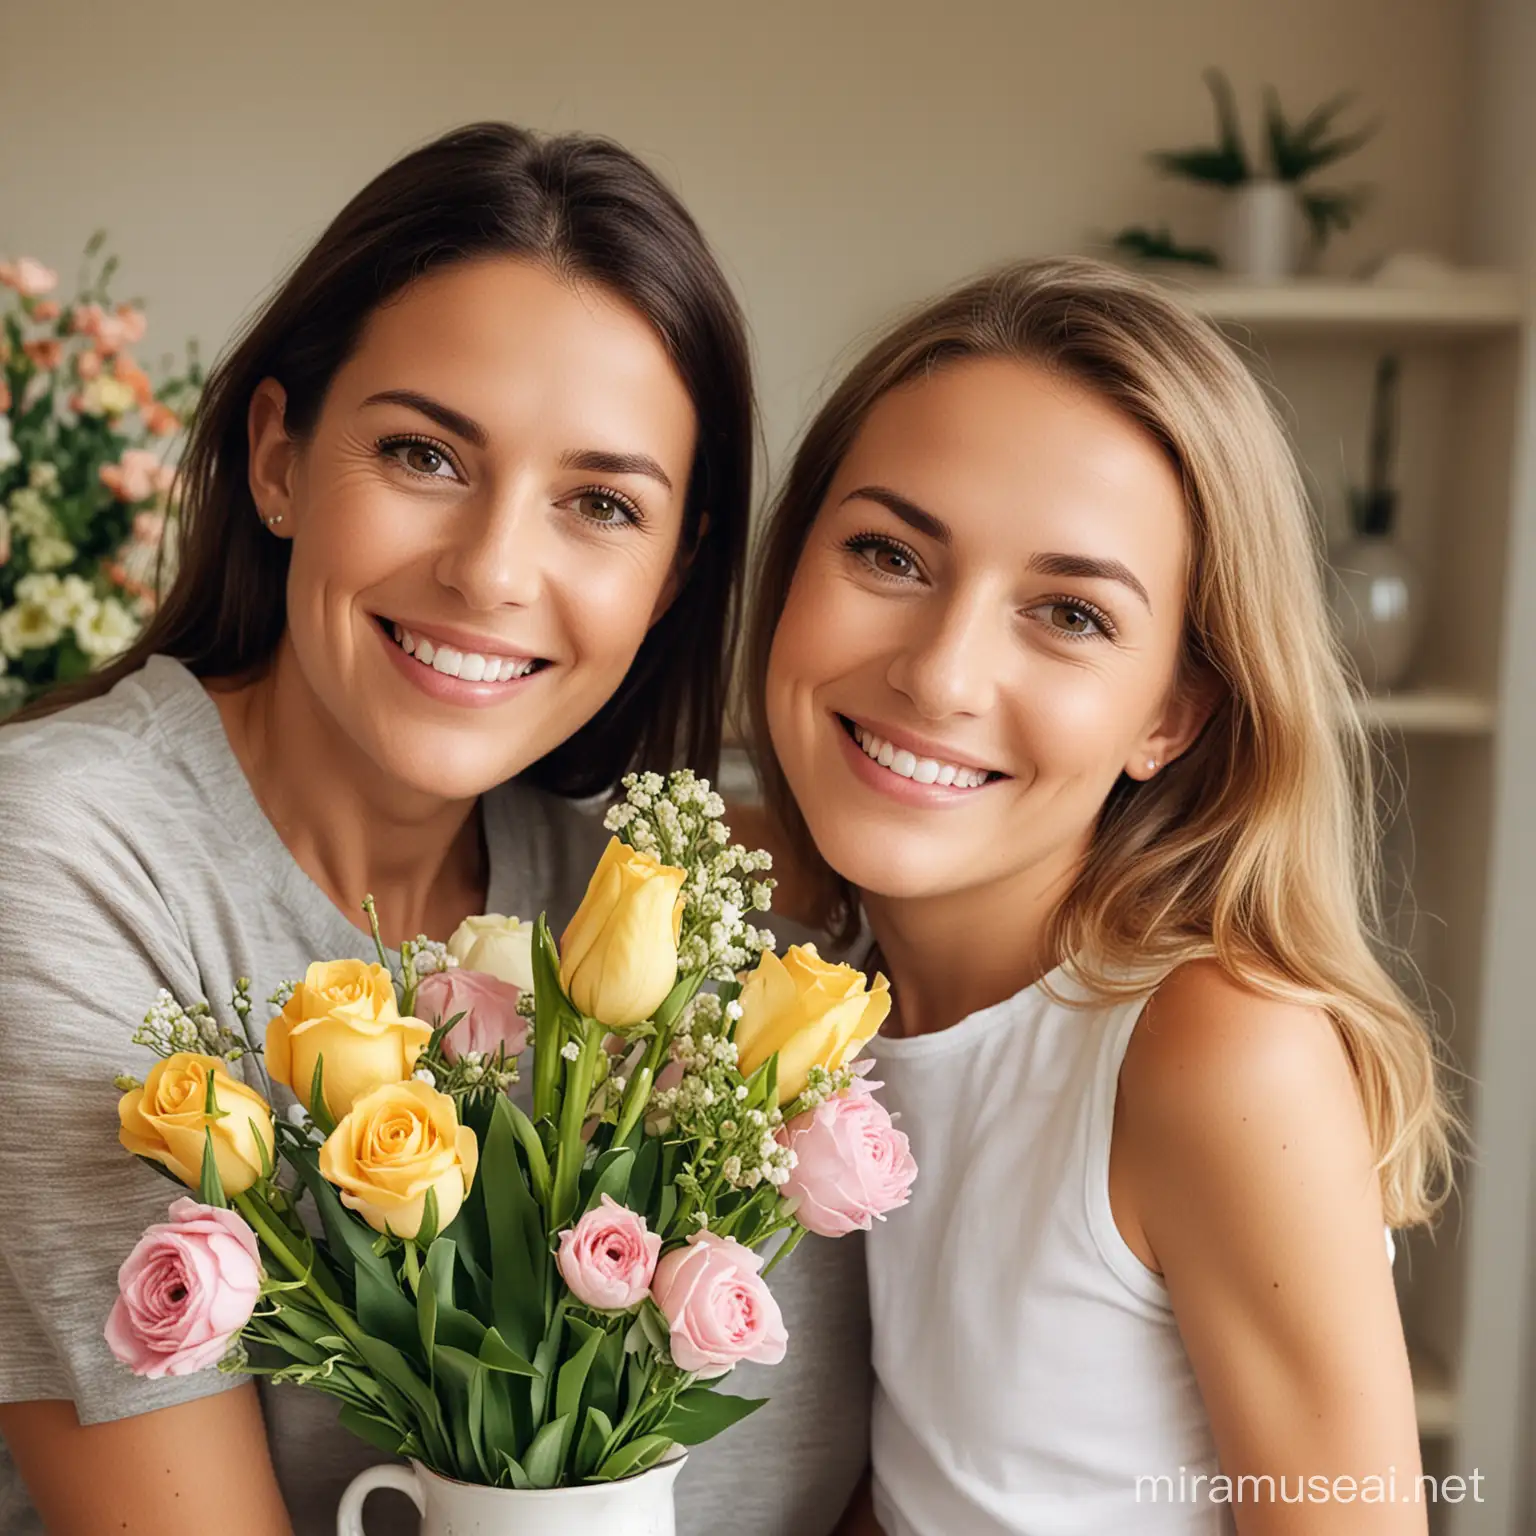 an image of a mother and daughter smiling with a vase of flowers in the background 